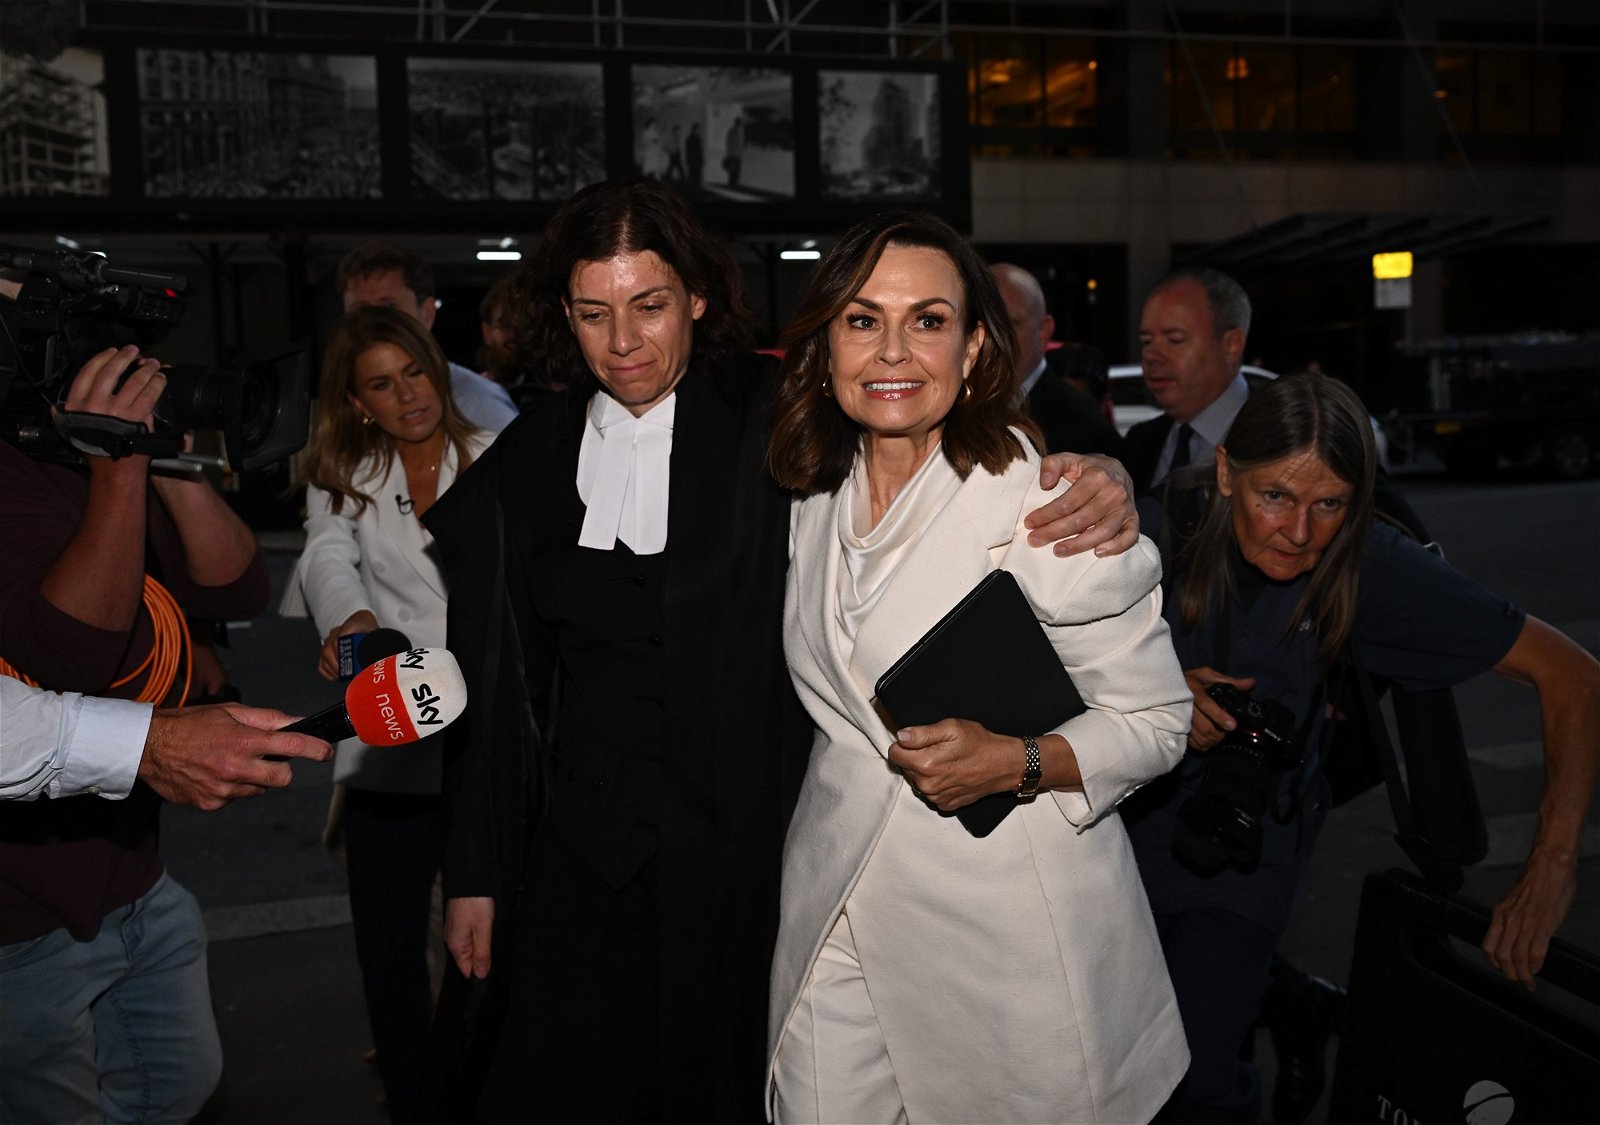 Lisa Wilkinson leaves court with lawyer.